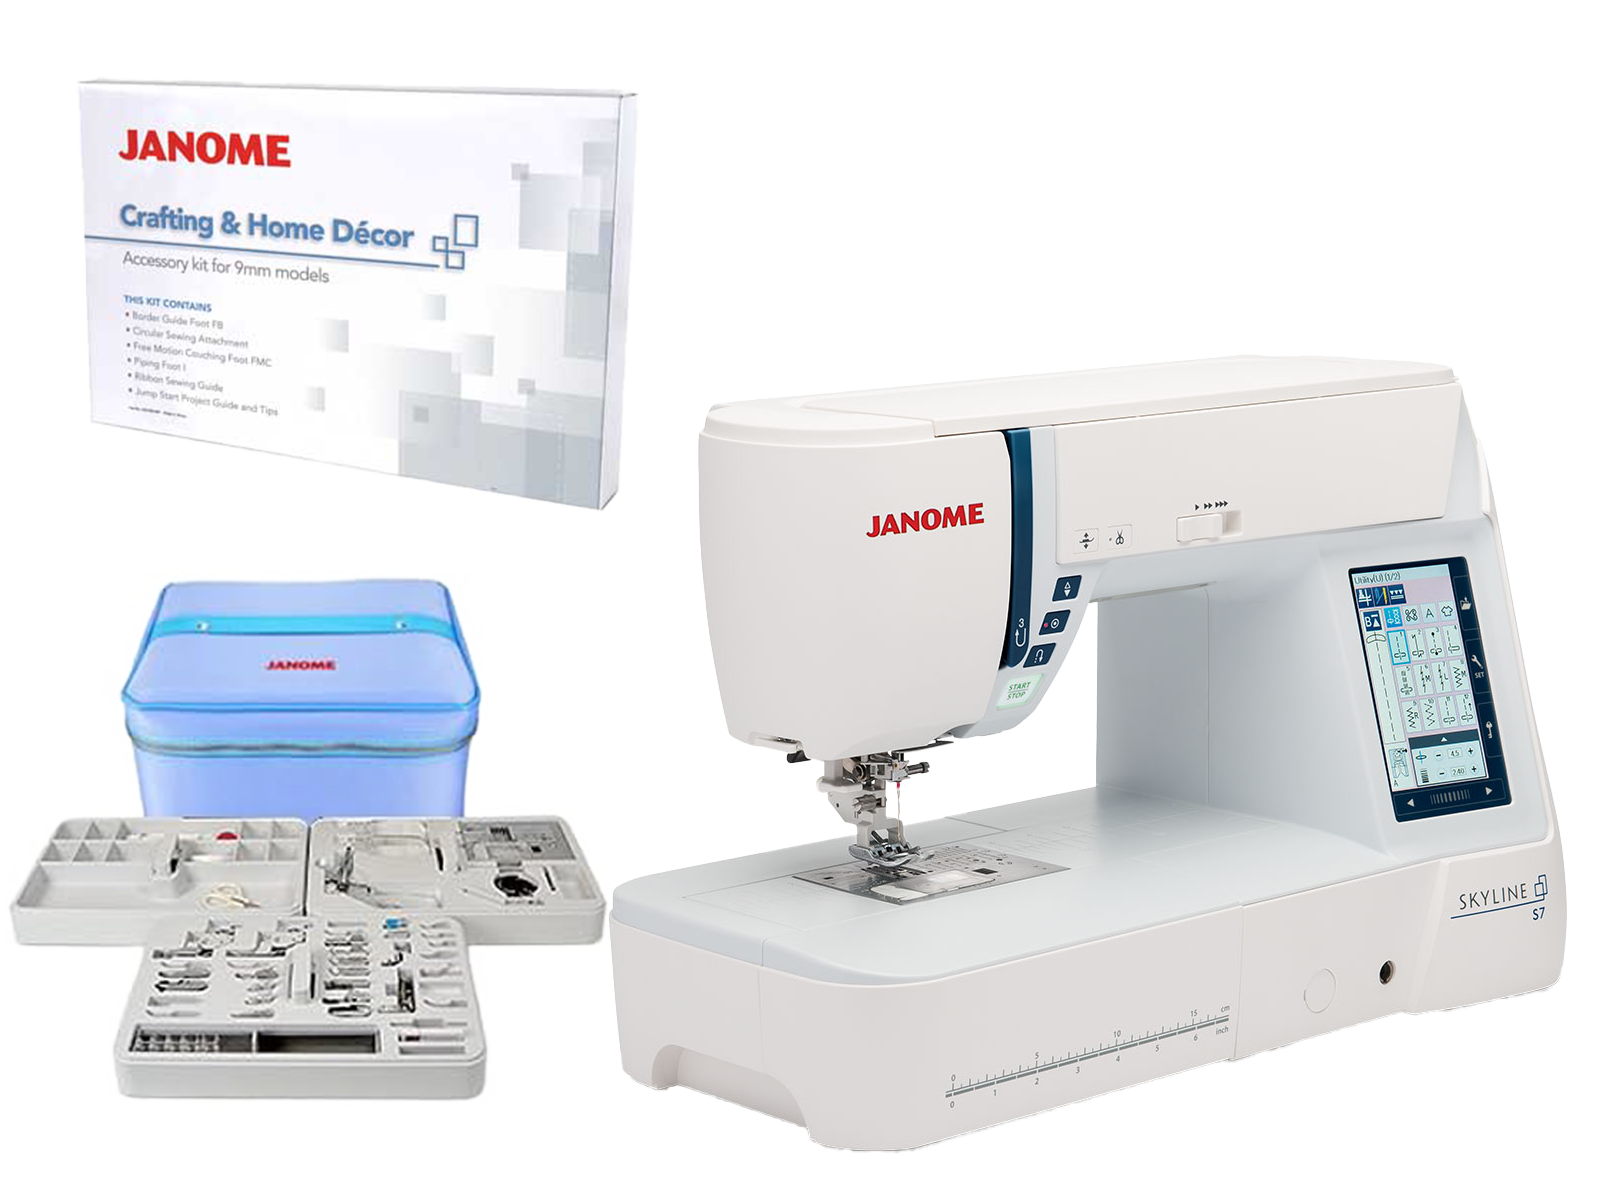 Janome Skyline S7 Sewing and Quilting Machine for Sale at World Weidner